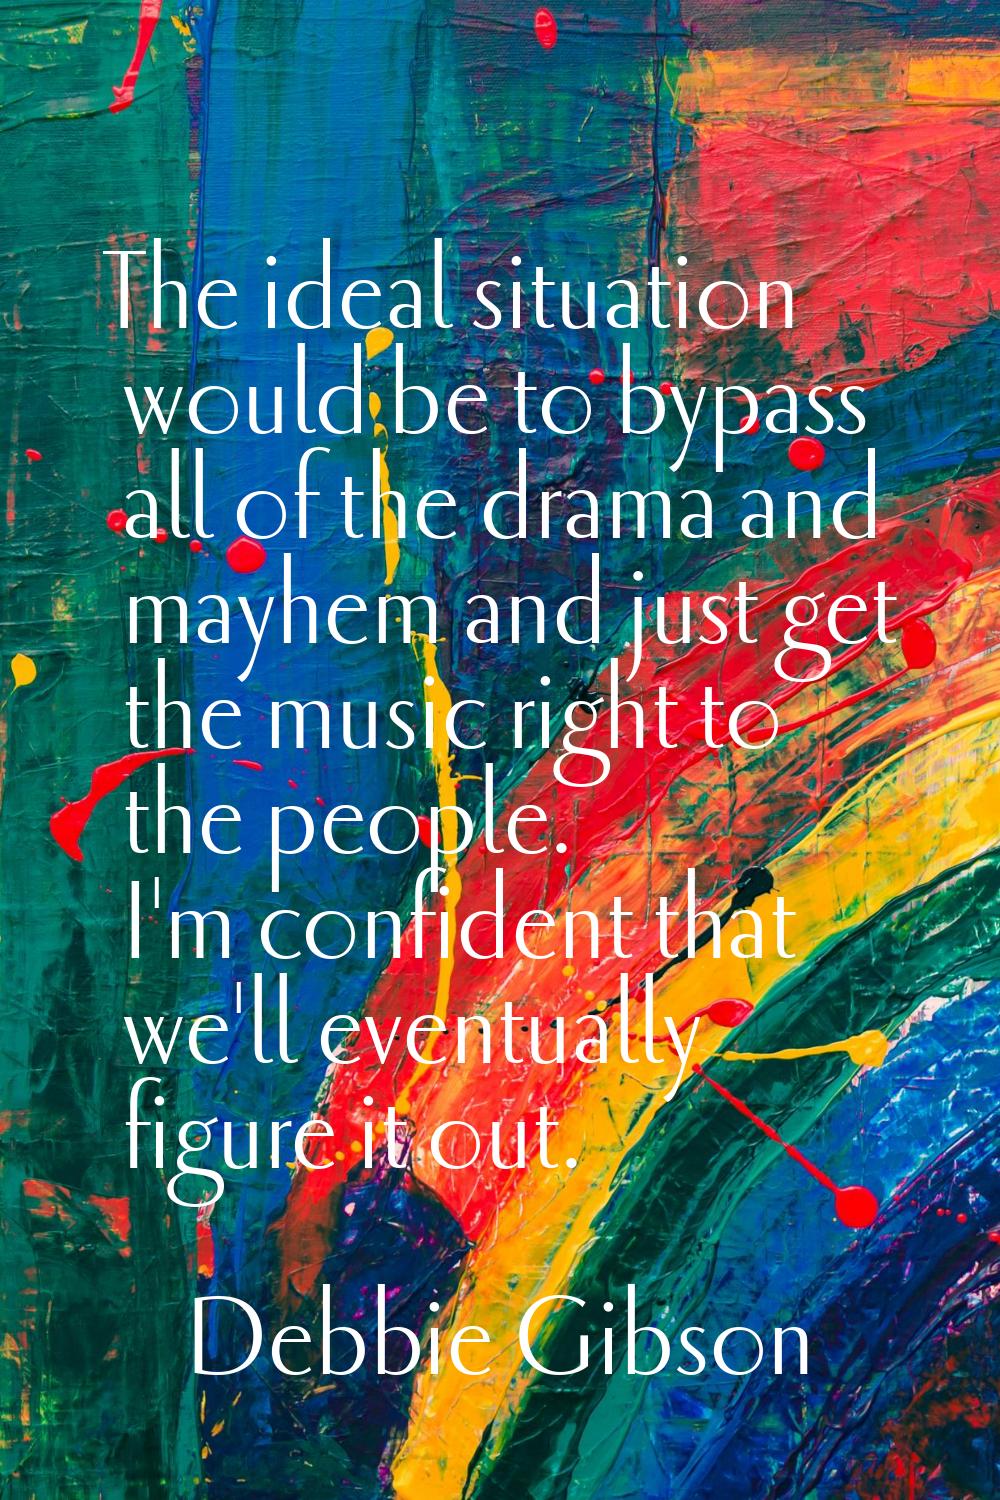 The ideal situation would be to bypass all of the drama and mayhem and just get the music right to 